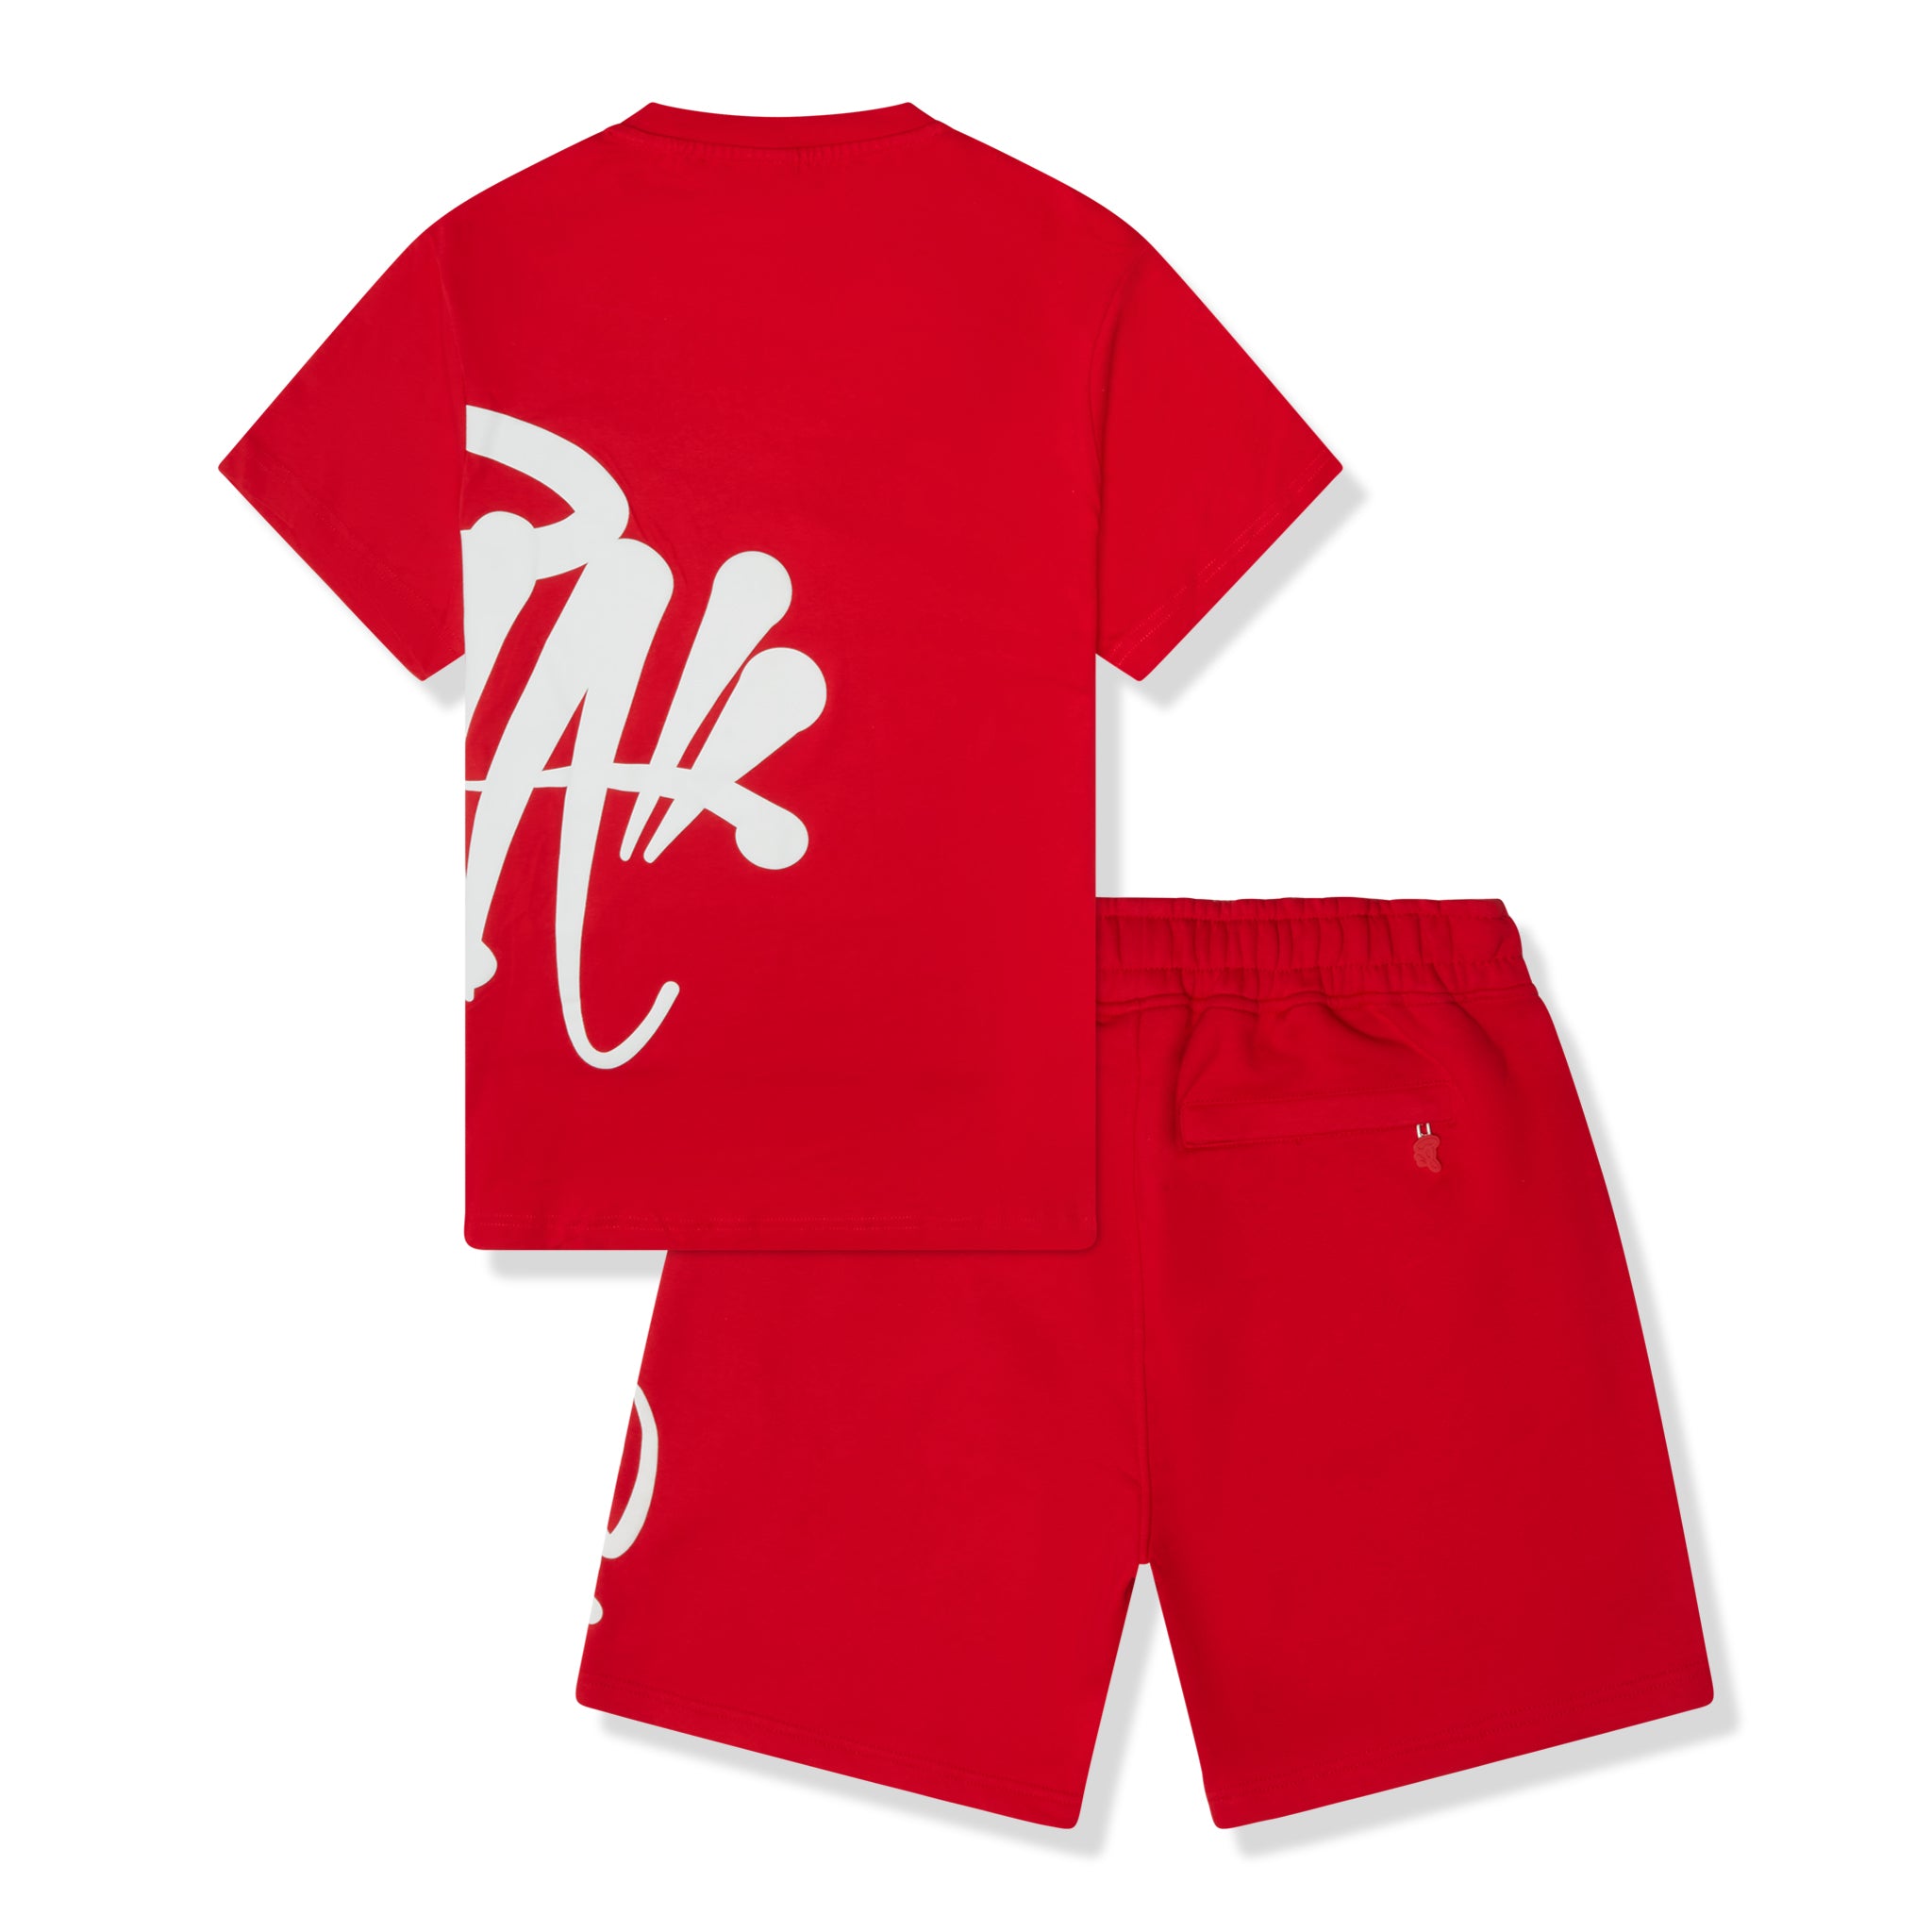 Back view of Syna World Team Syna Twinset Red T-Shirt & Shorts